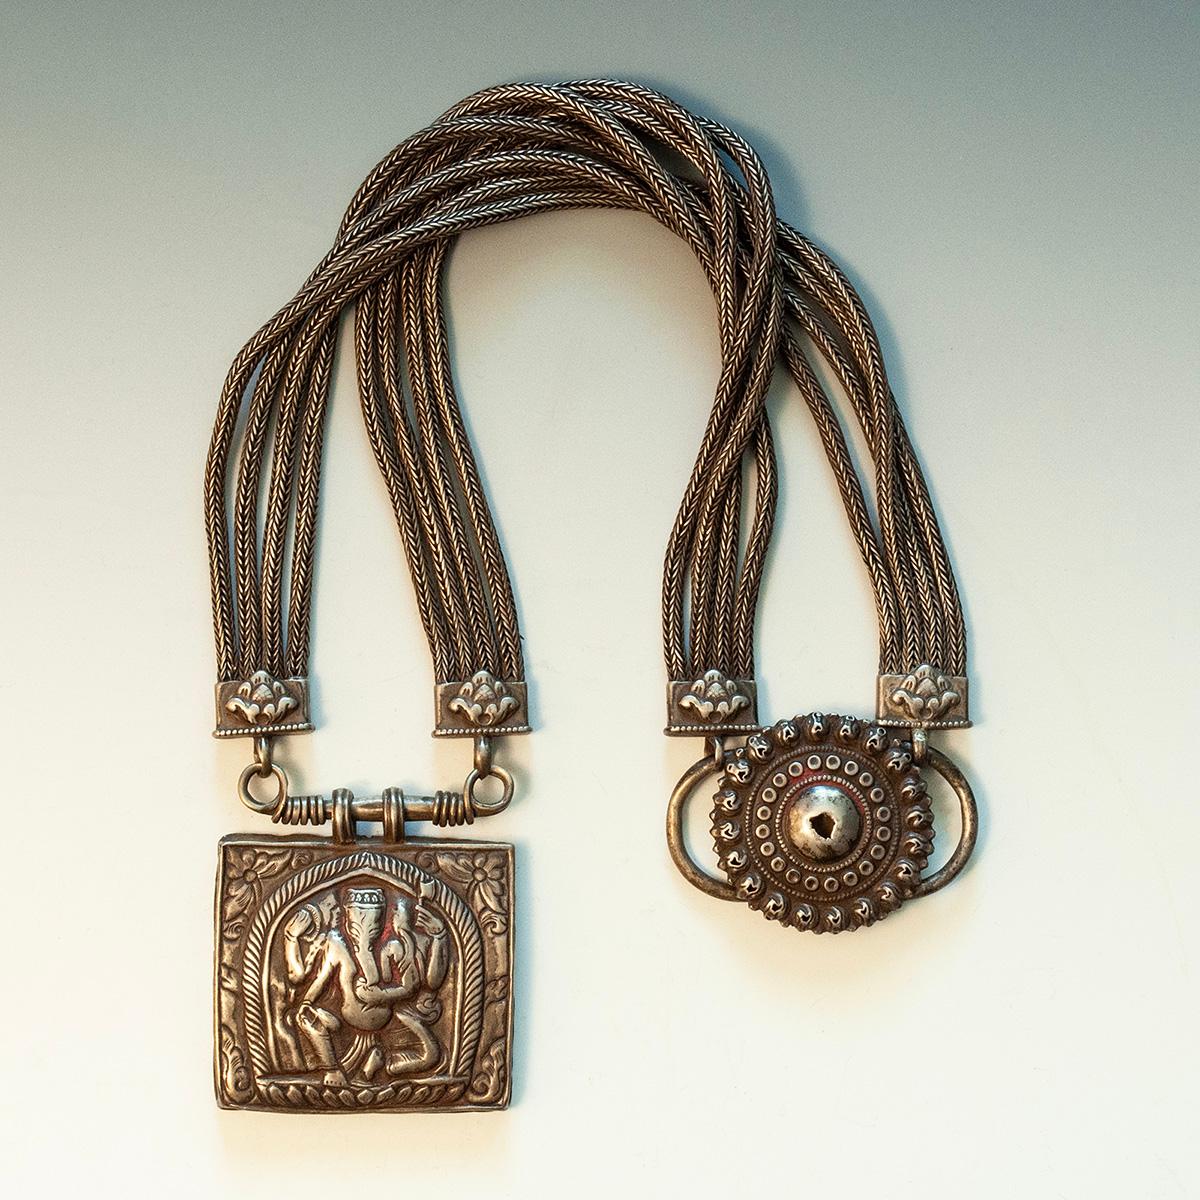 19th to early 20th century Jantar necklace, Nepal

This long silver alloy (kakar-manka) necklace, a jantar, features a hollow amulet box depicting the elephant god Ganesha, which is suspended from eight woven silver wire cords, anchored in the back